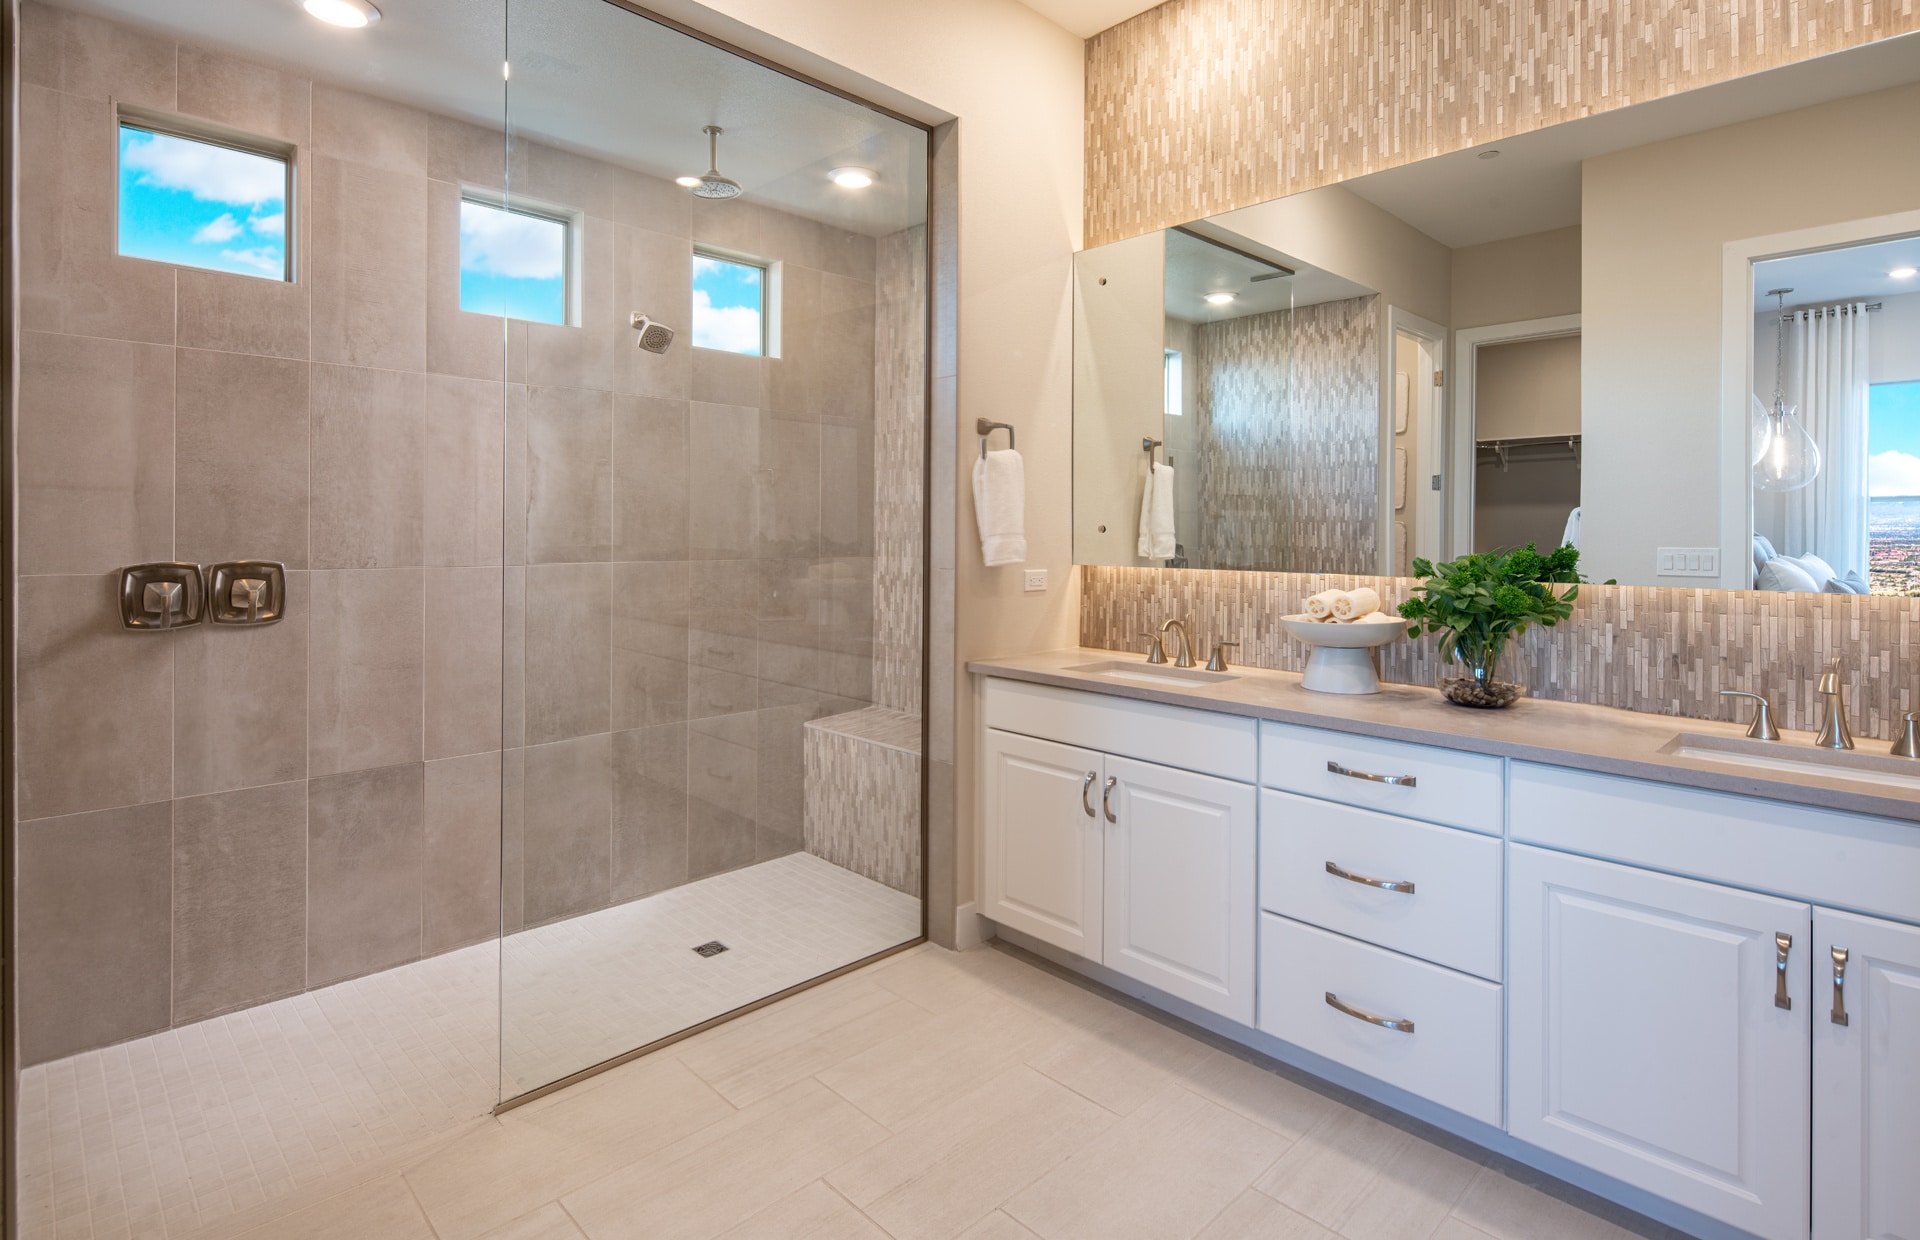 Primary Bathroom of Cesena Model at Carmel Cliff by Pulte Homes